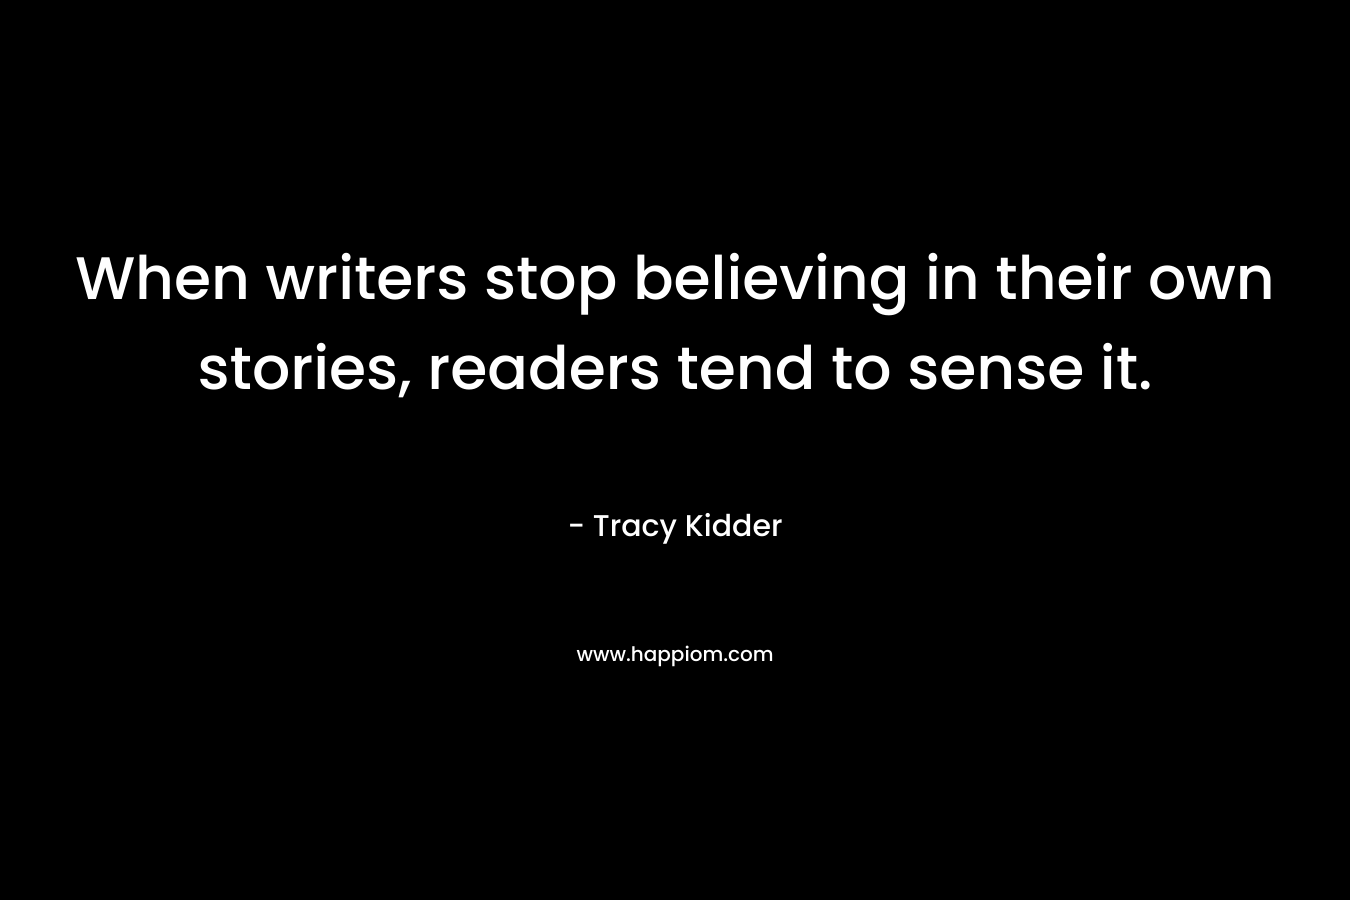 When writers stop believing in their own stories, readers tend to sense it. – Tracy Kidder